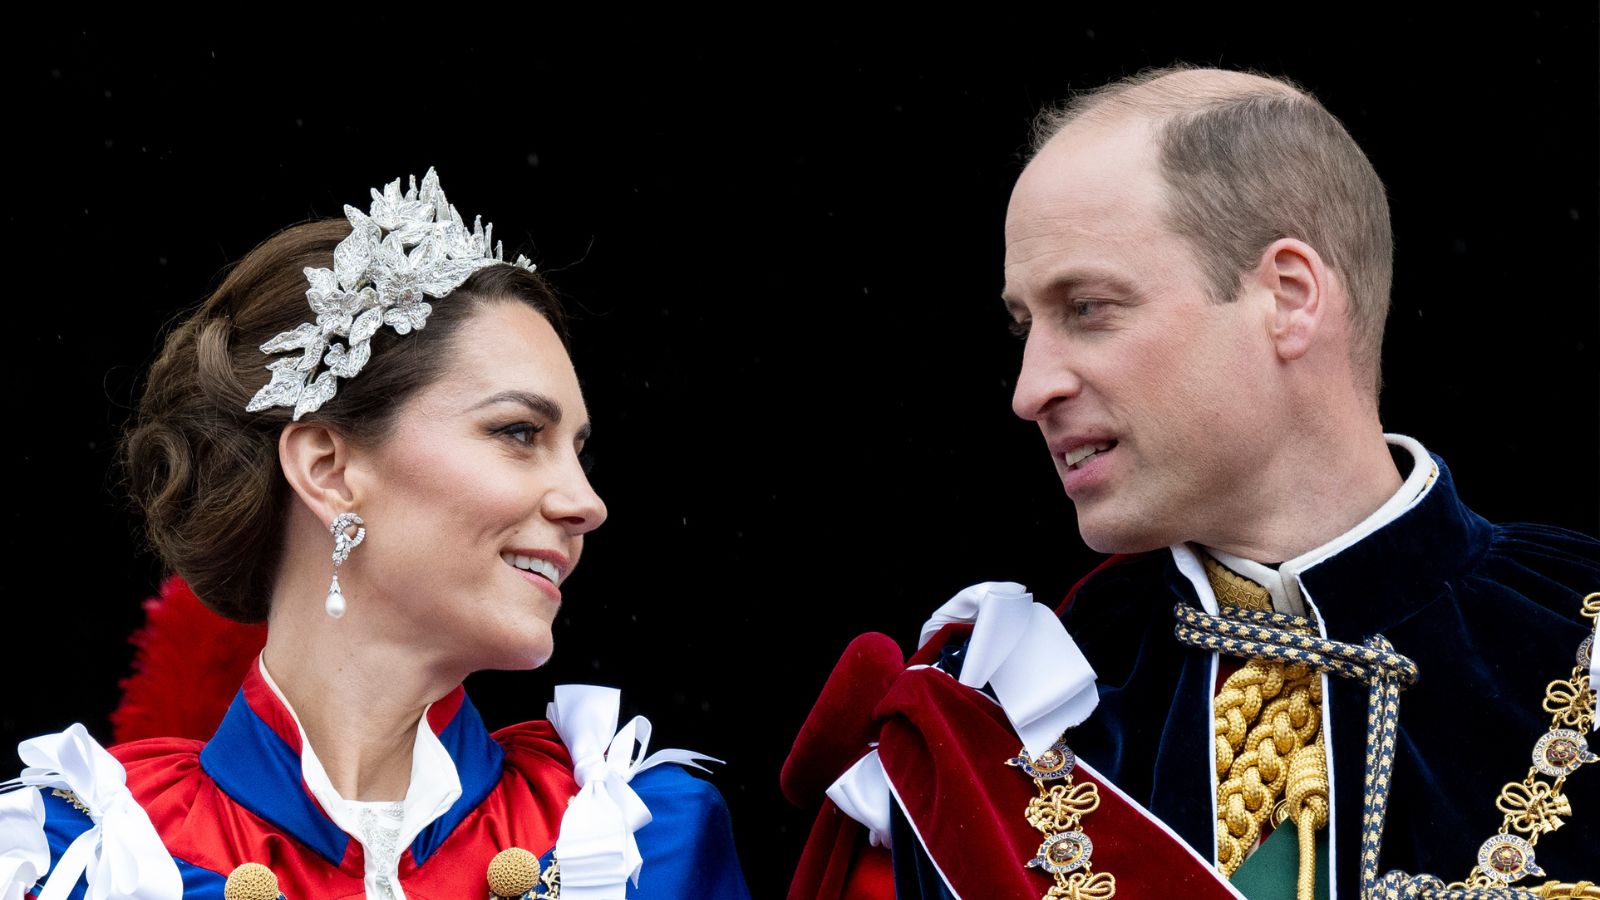 Kate Middleton and Prince William’s relationship in pictures - King Charles coronation